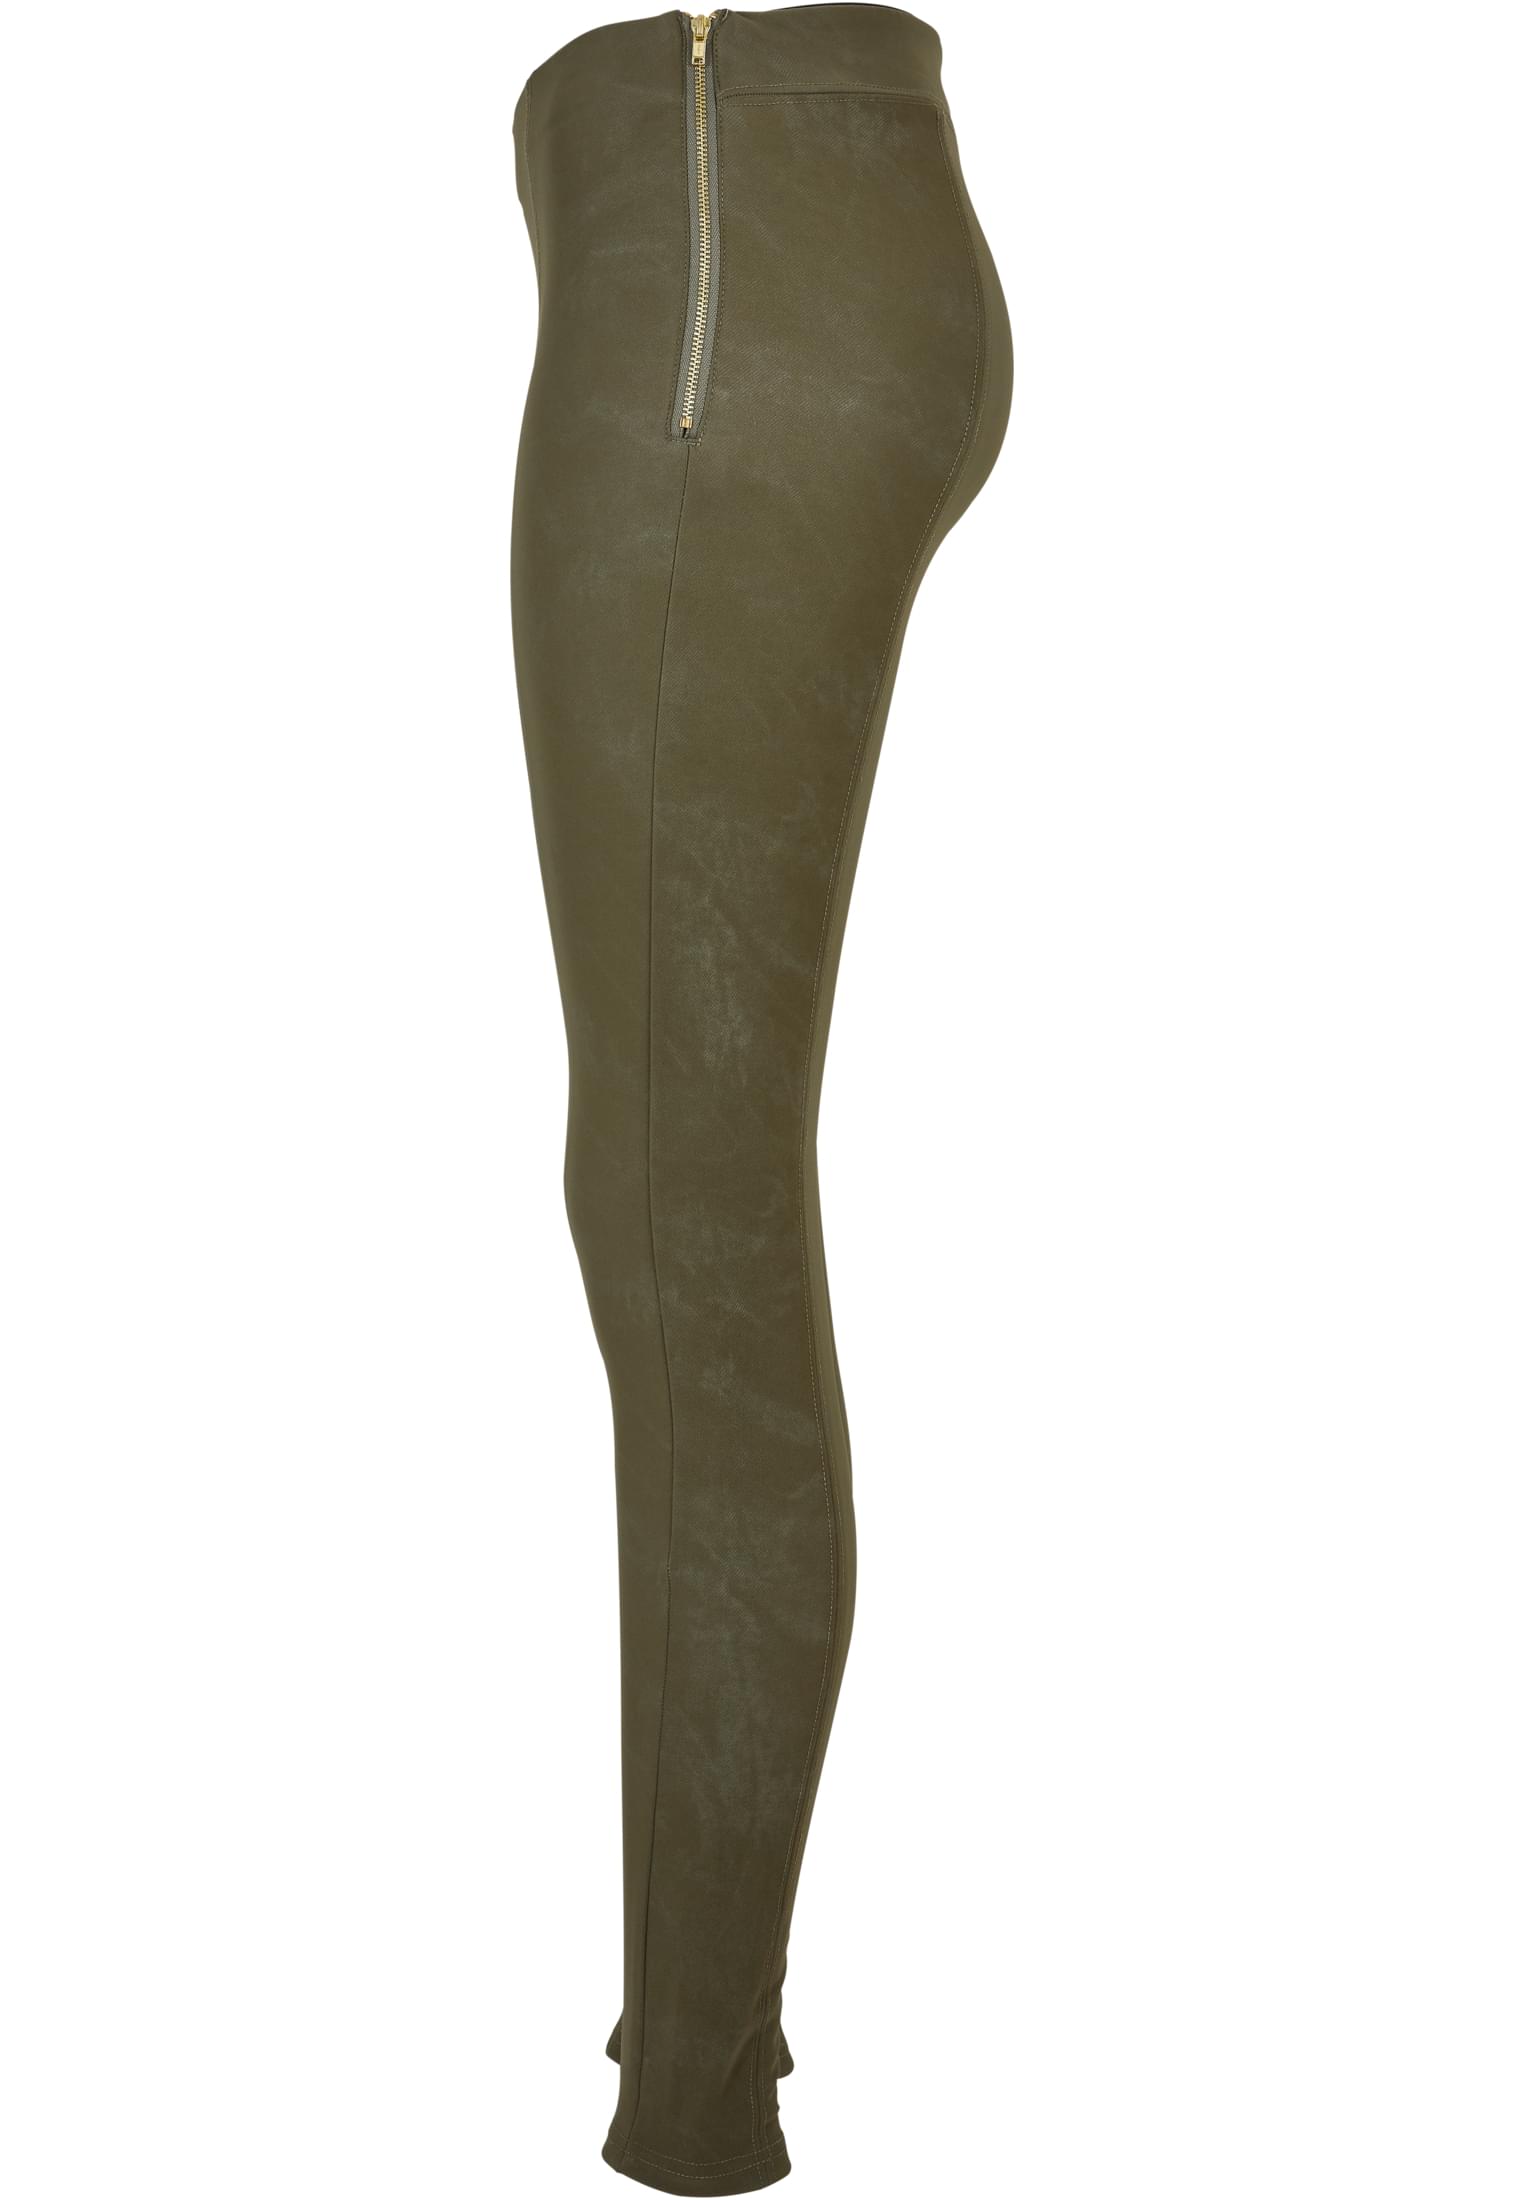 Damen Ladies Washed Faux Leather Pants in Farbe olive